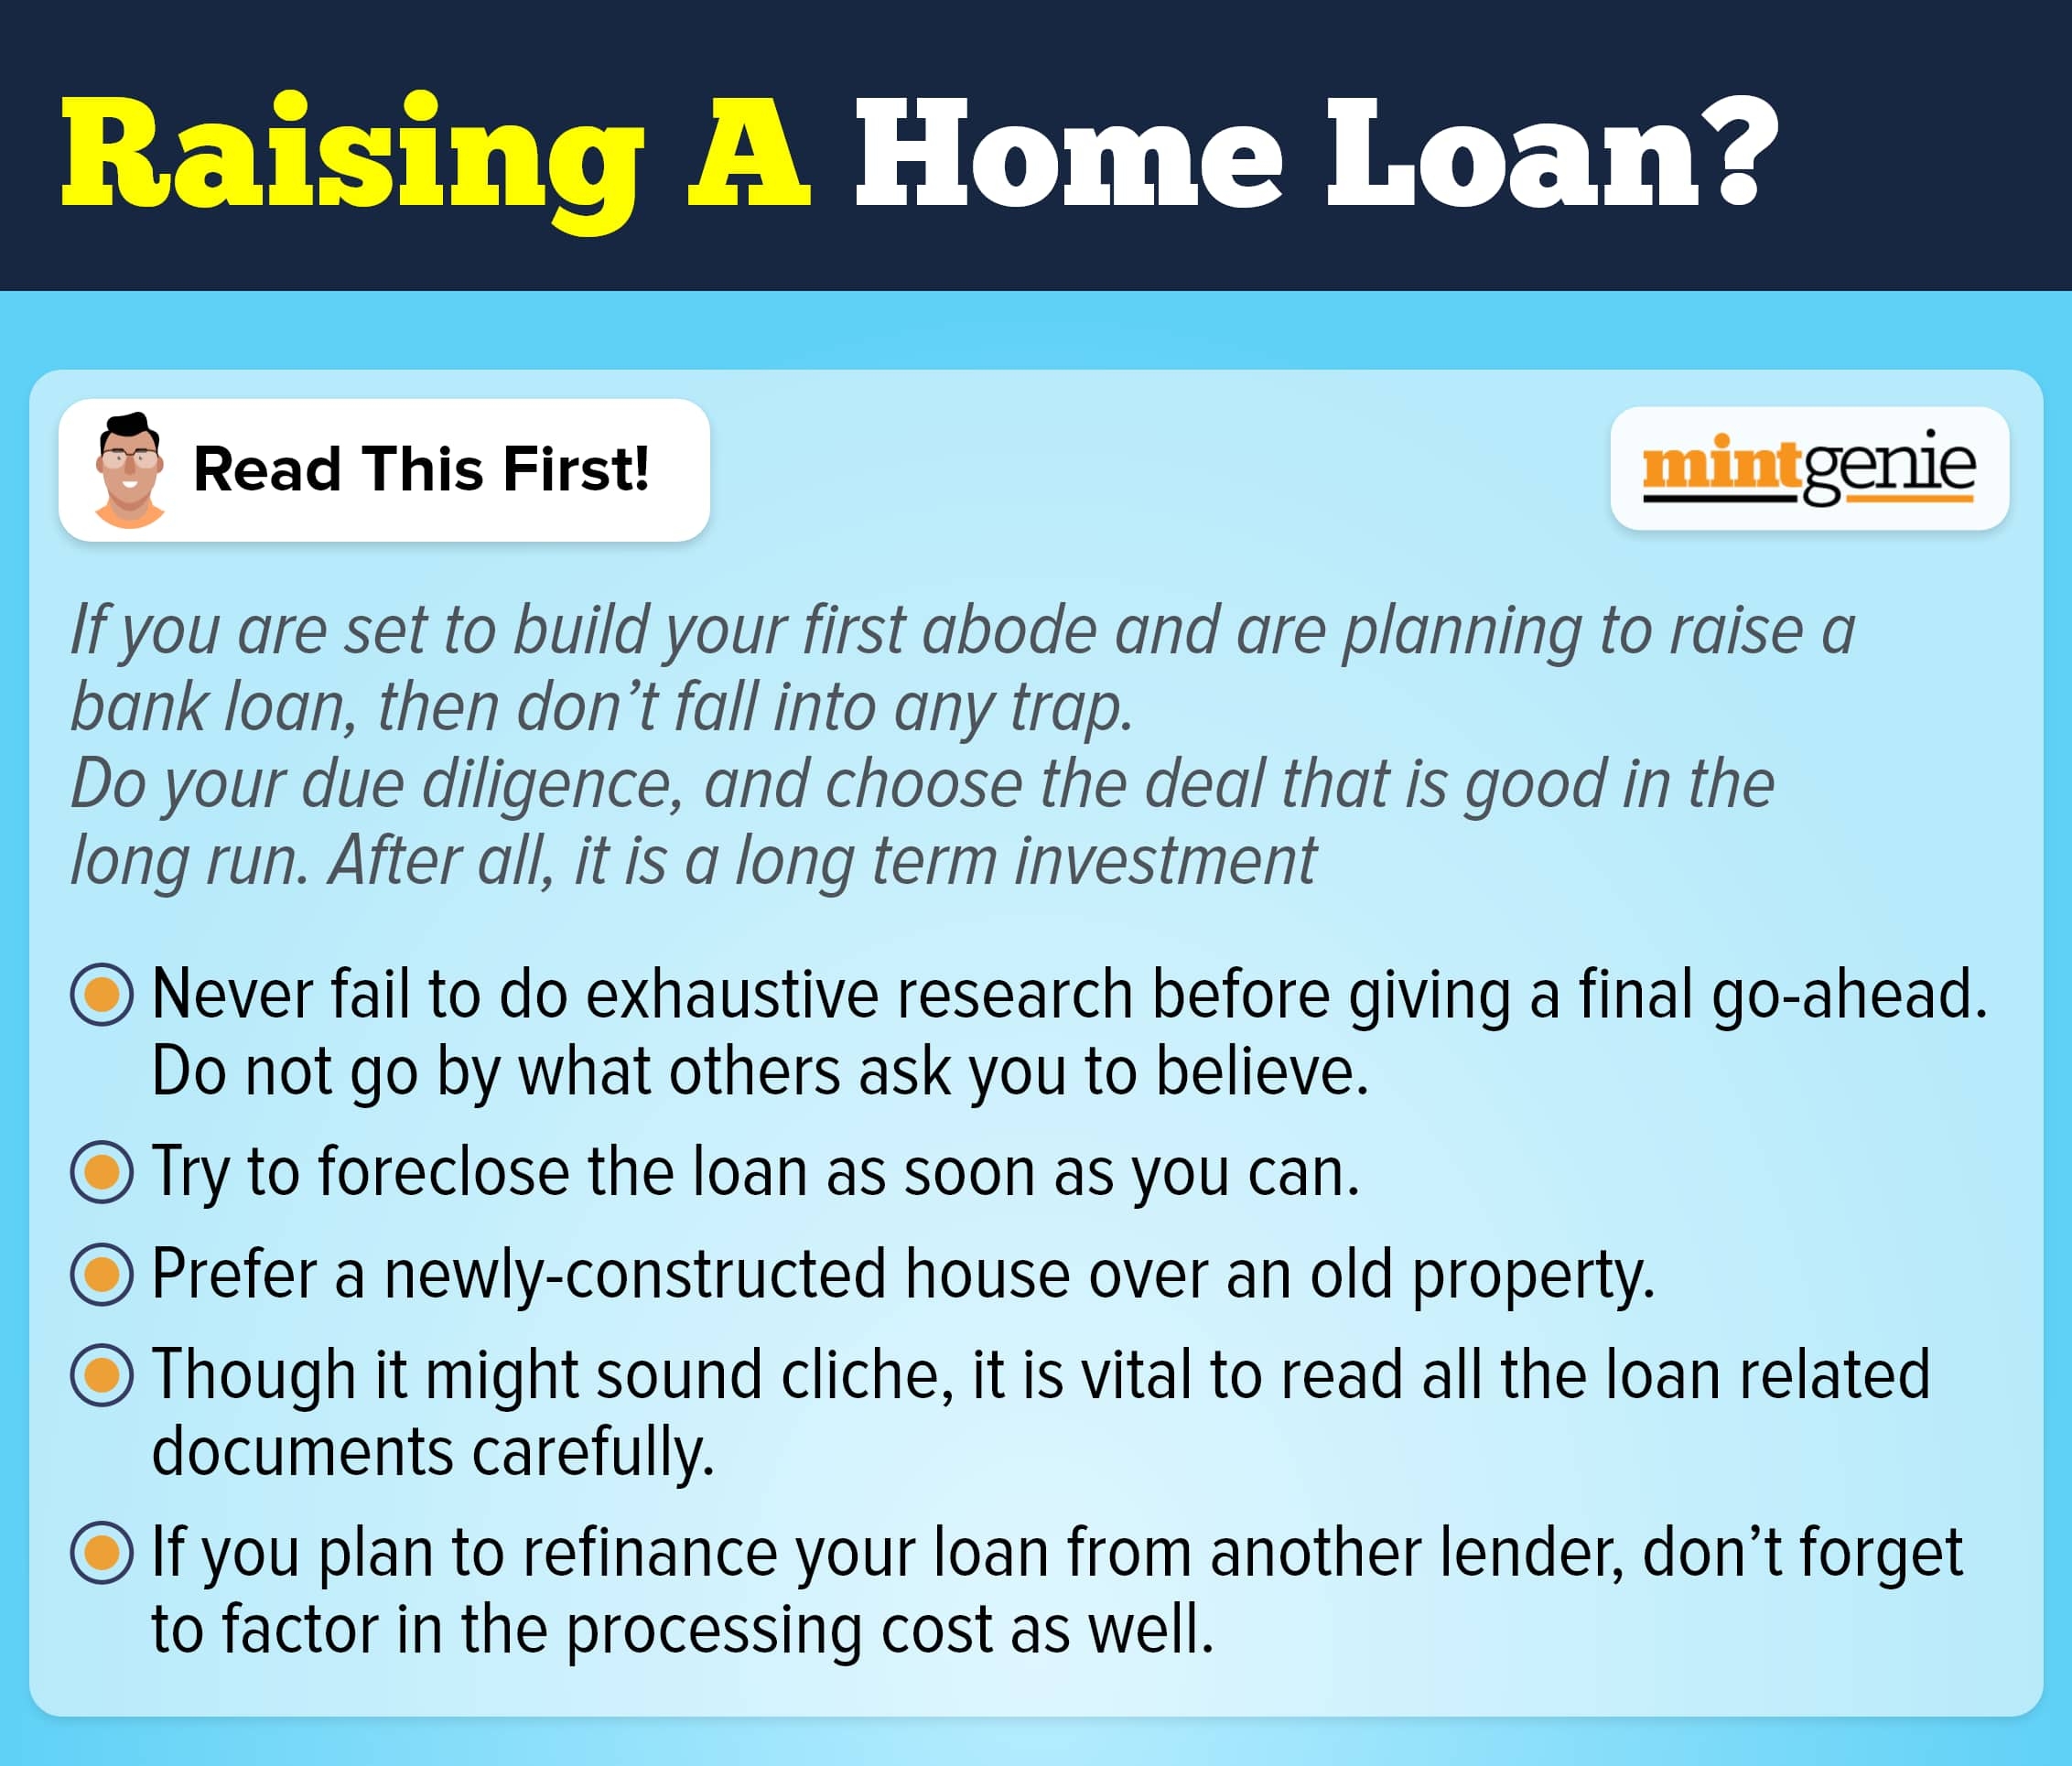 If you are planning to take a home loan, prefer a newly-constructed house over an old property.&nbsp;